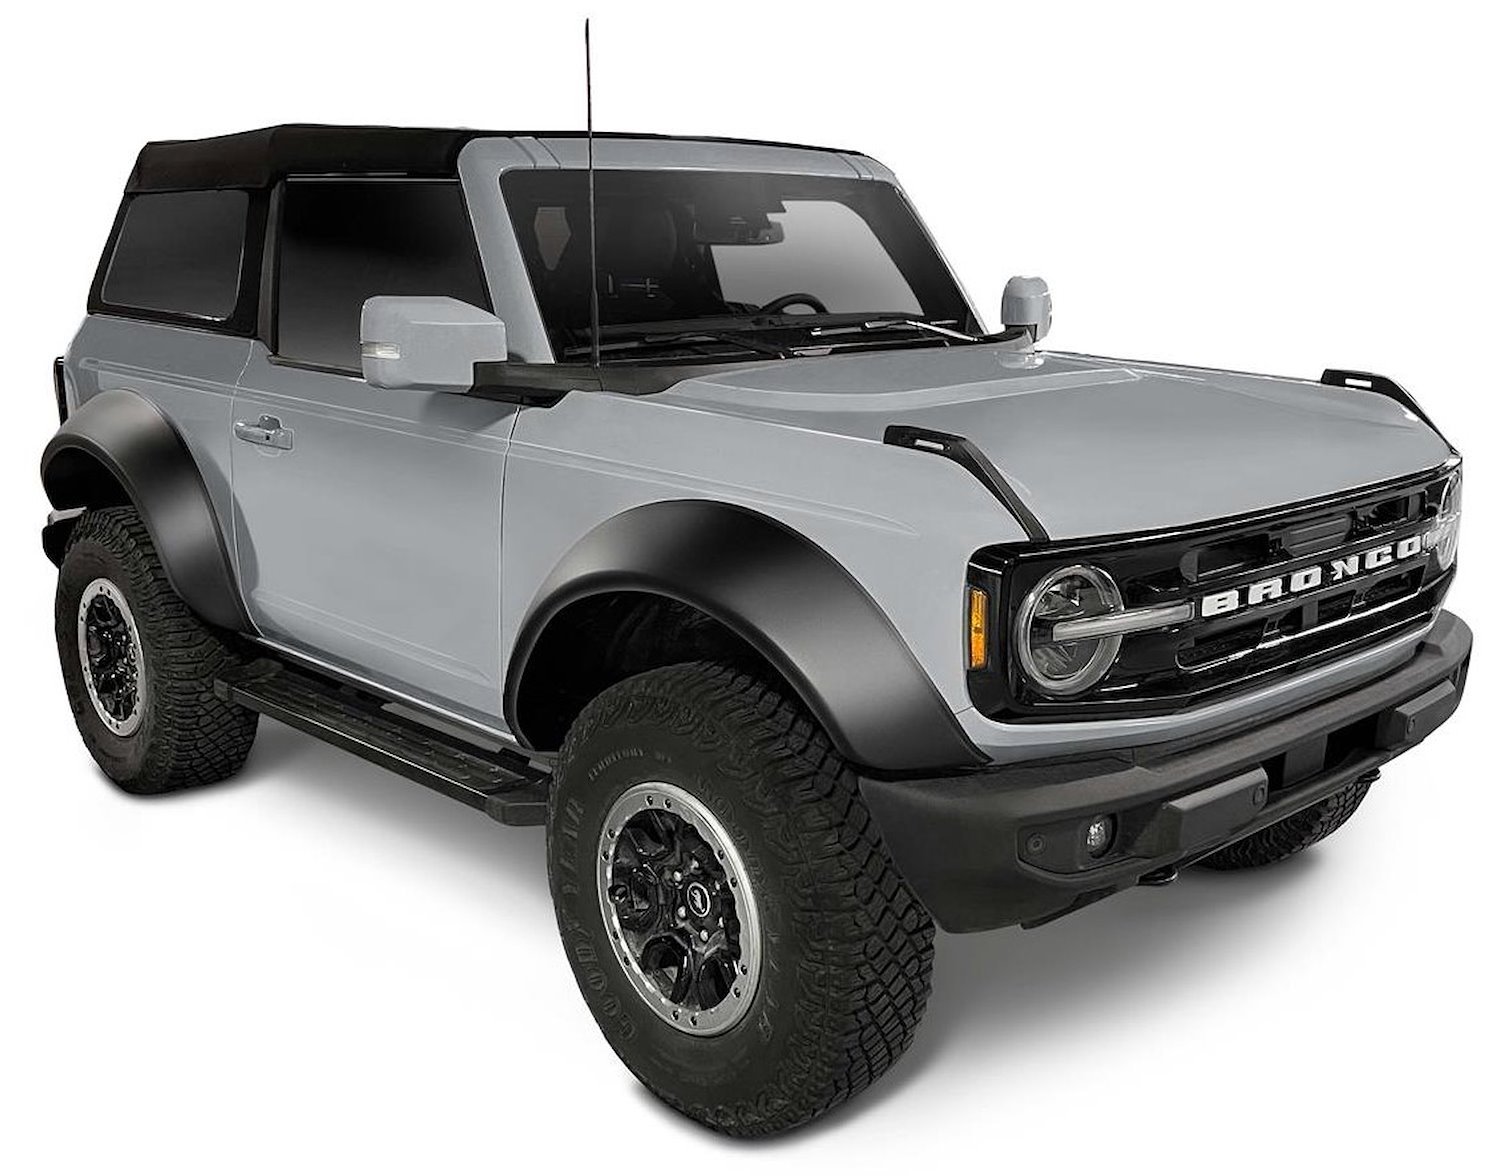 Extend-A-Fender Flares for Late-Model Ford Bronco 2-Door